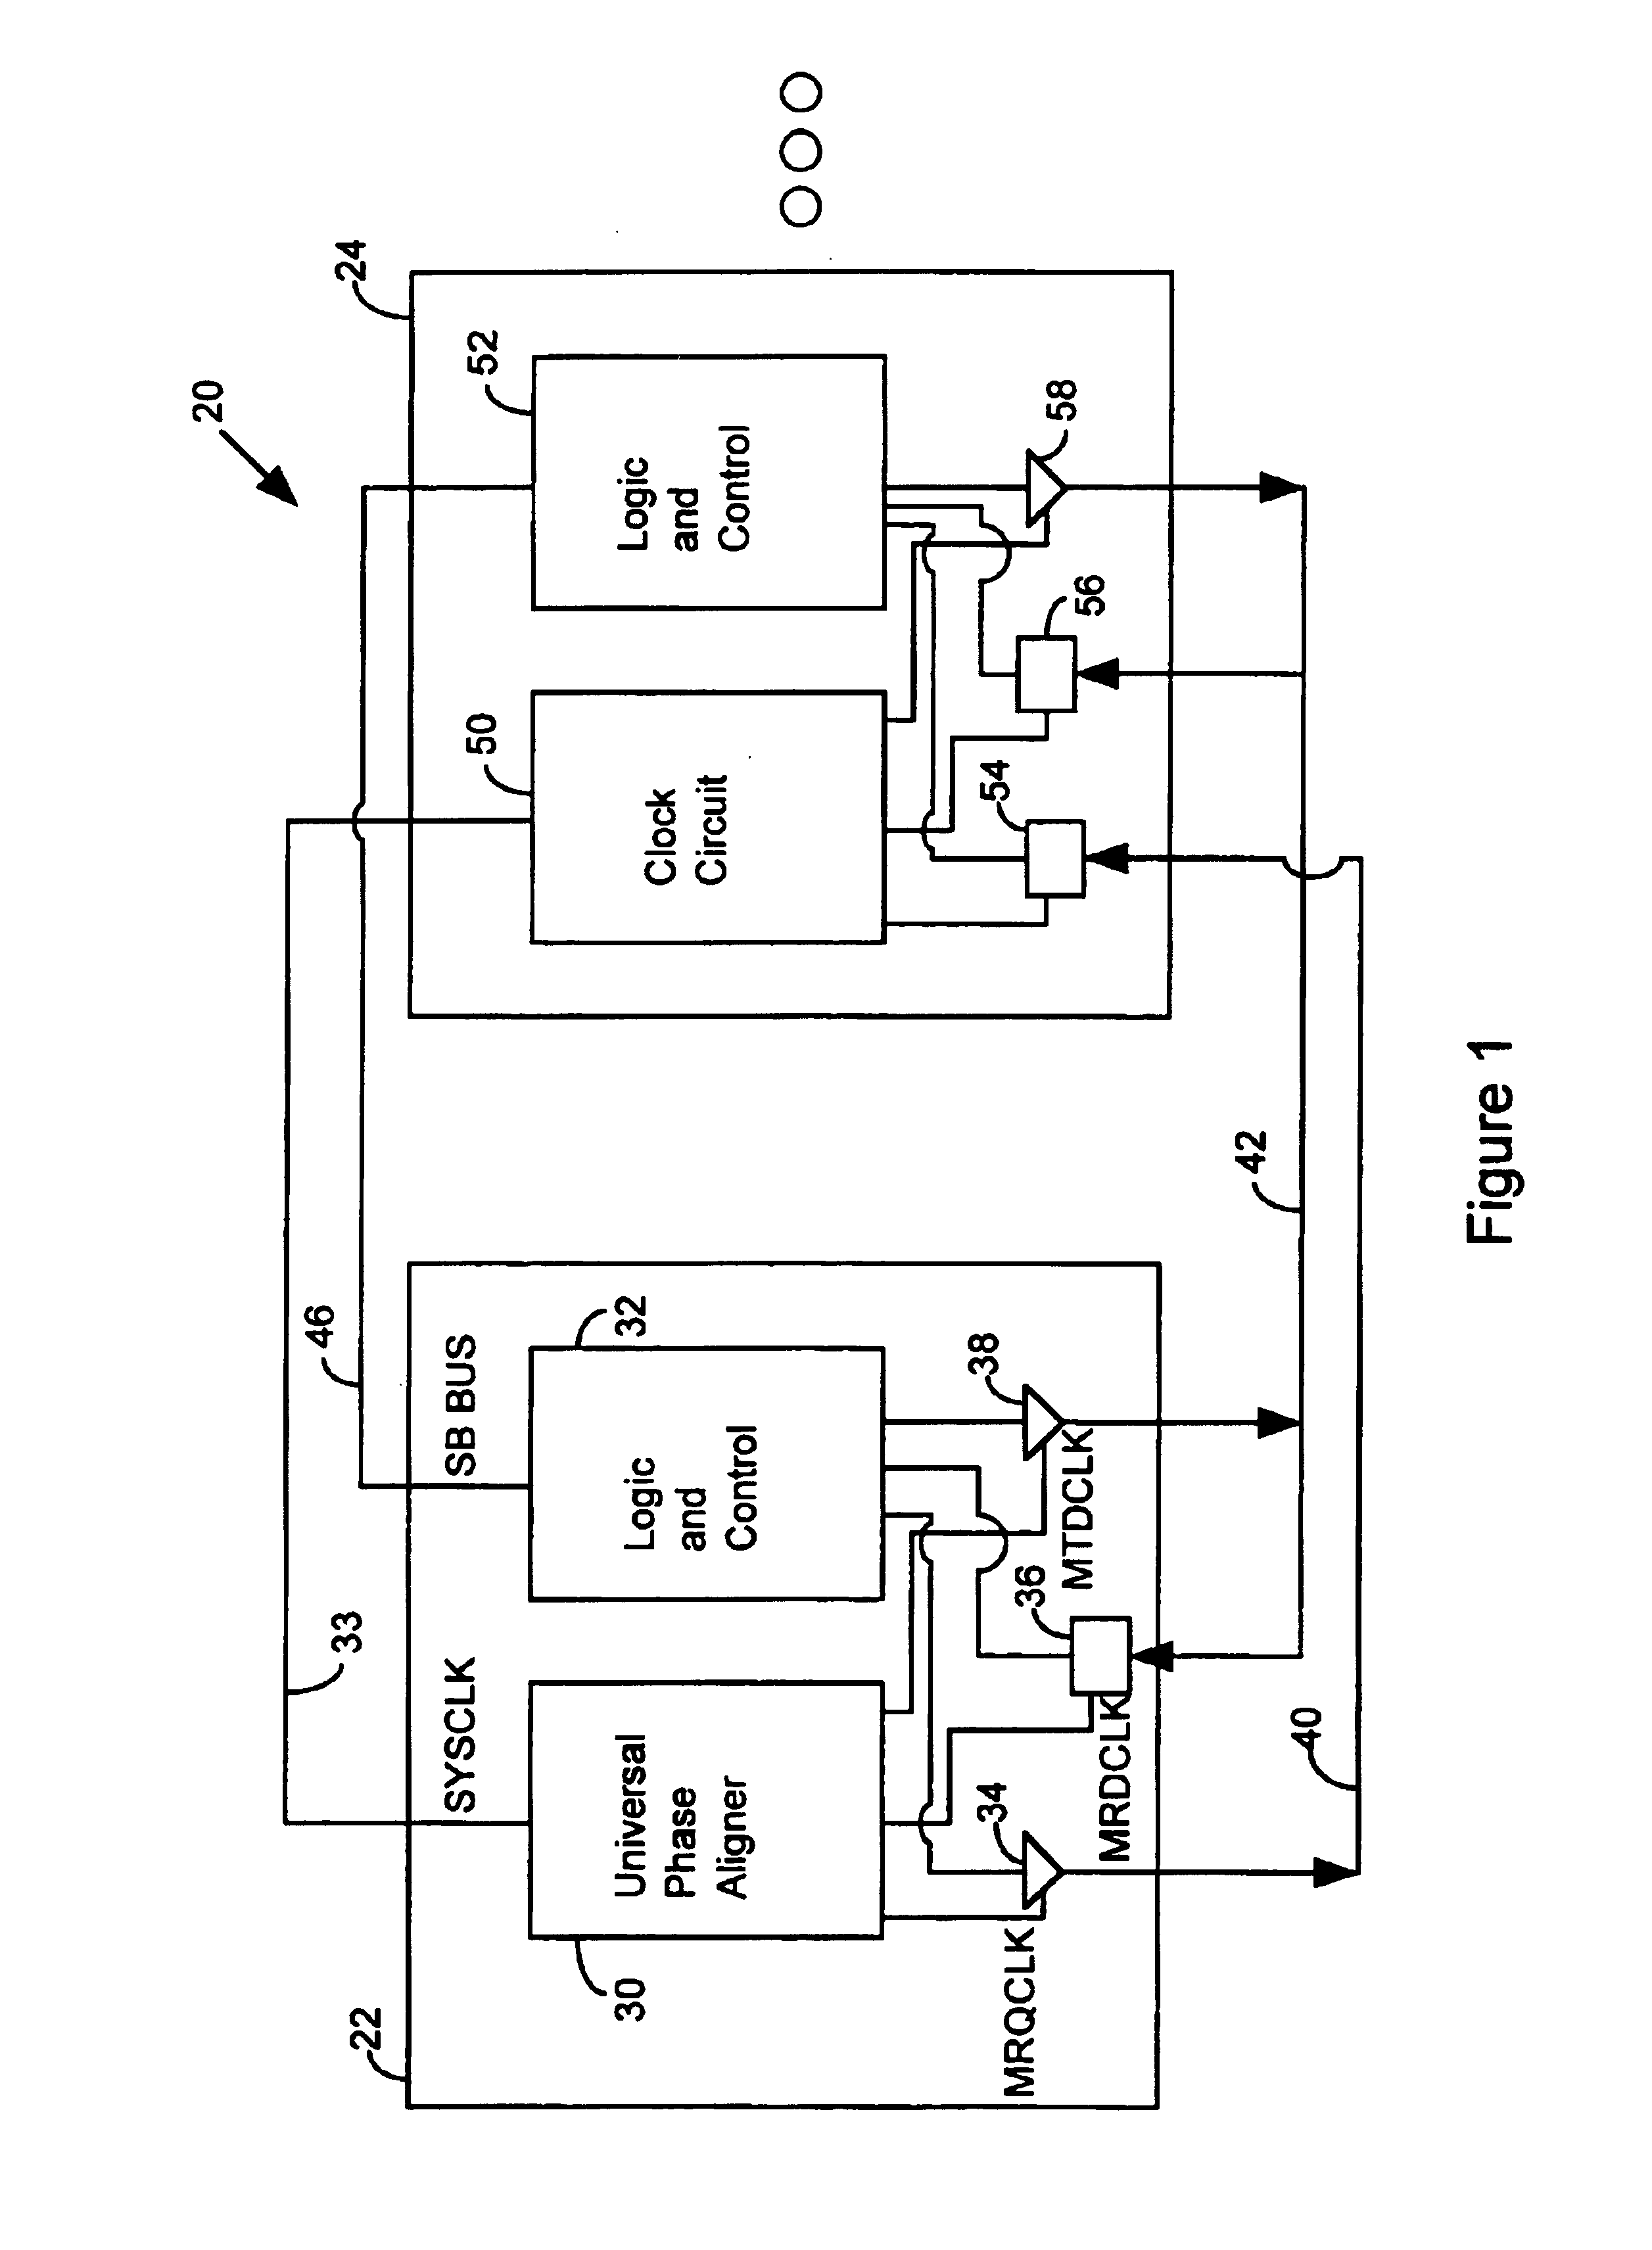 Apparatus and method for controlling a master/slave system via master device synchronization